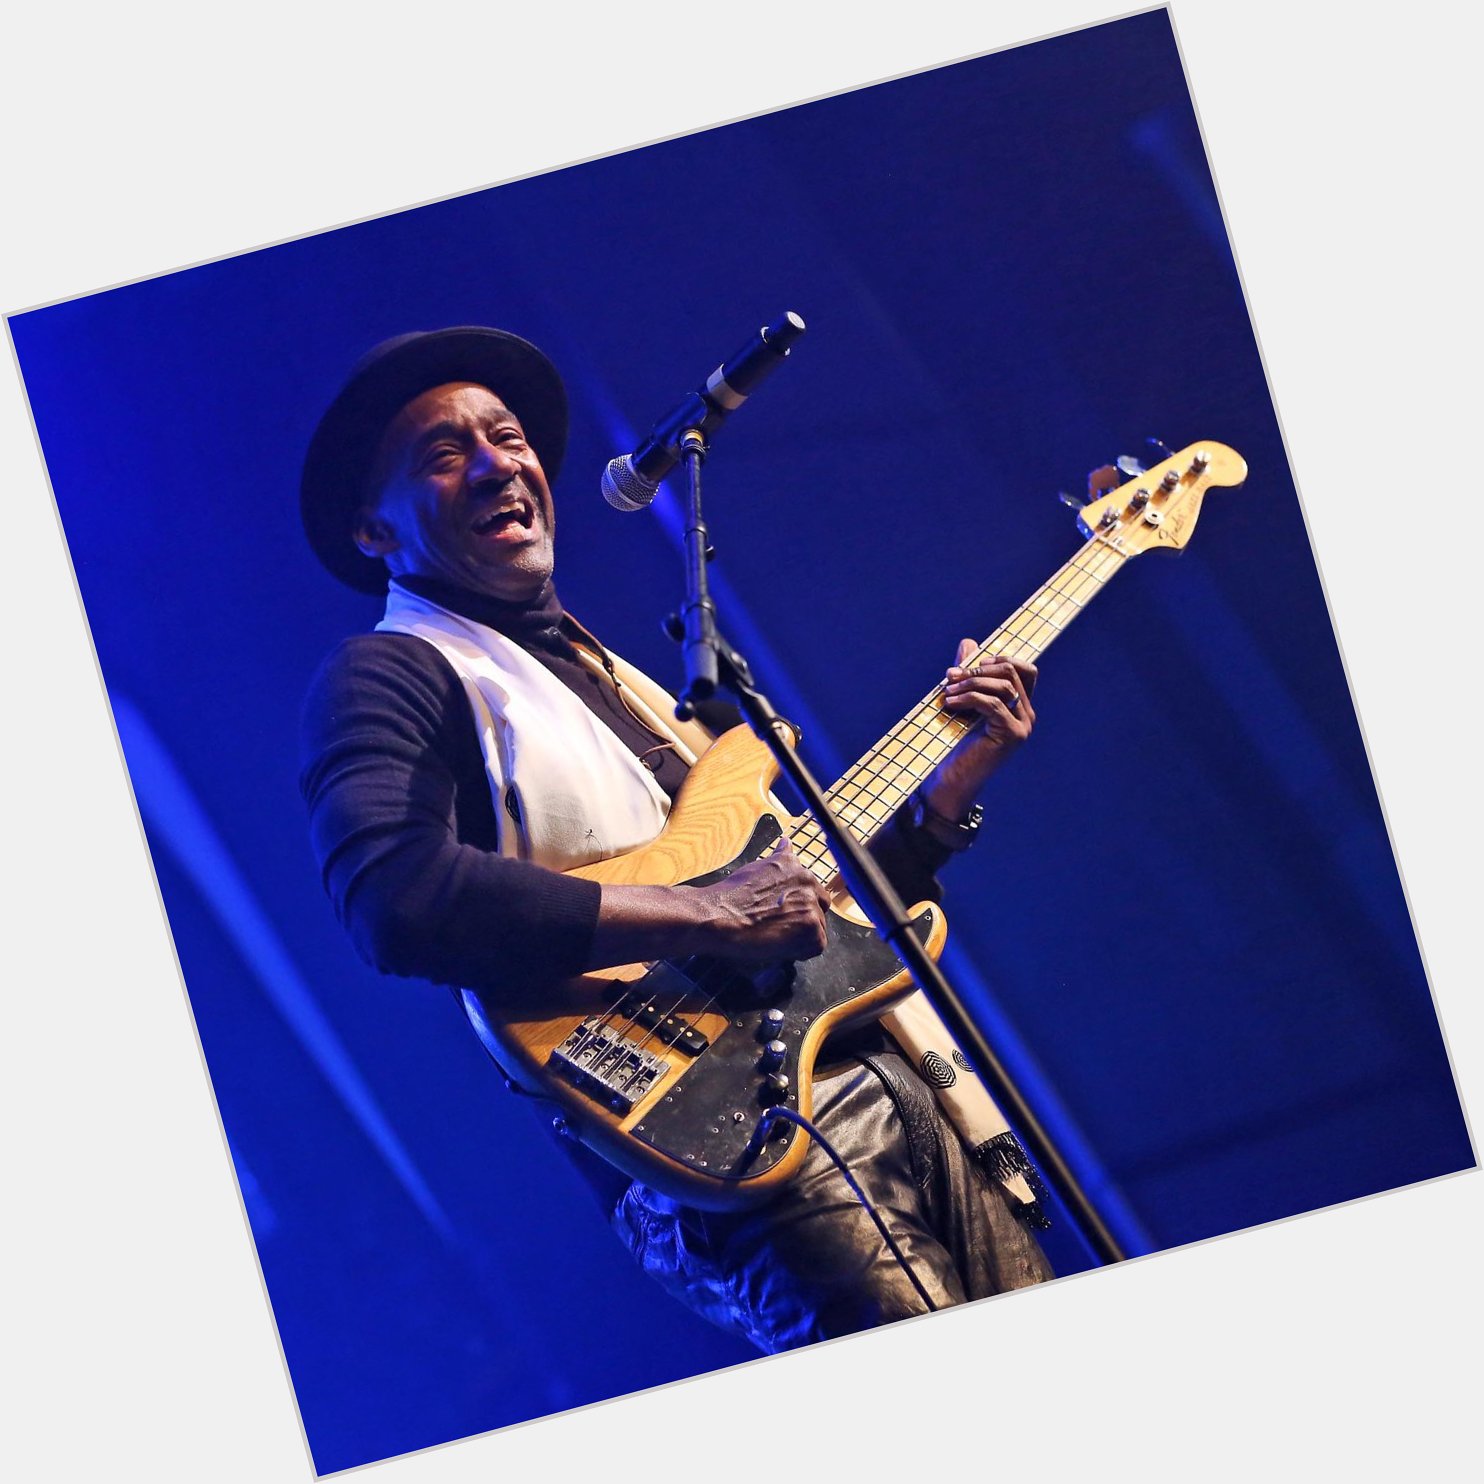 Sending happy birthday wishes to our host and favorite bass player Mr. Marcus Miller. 